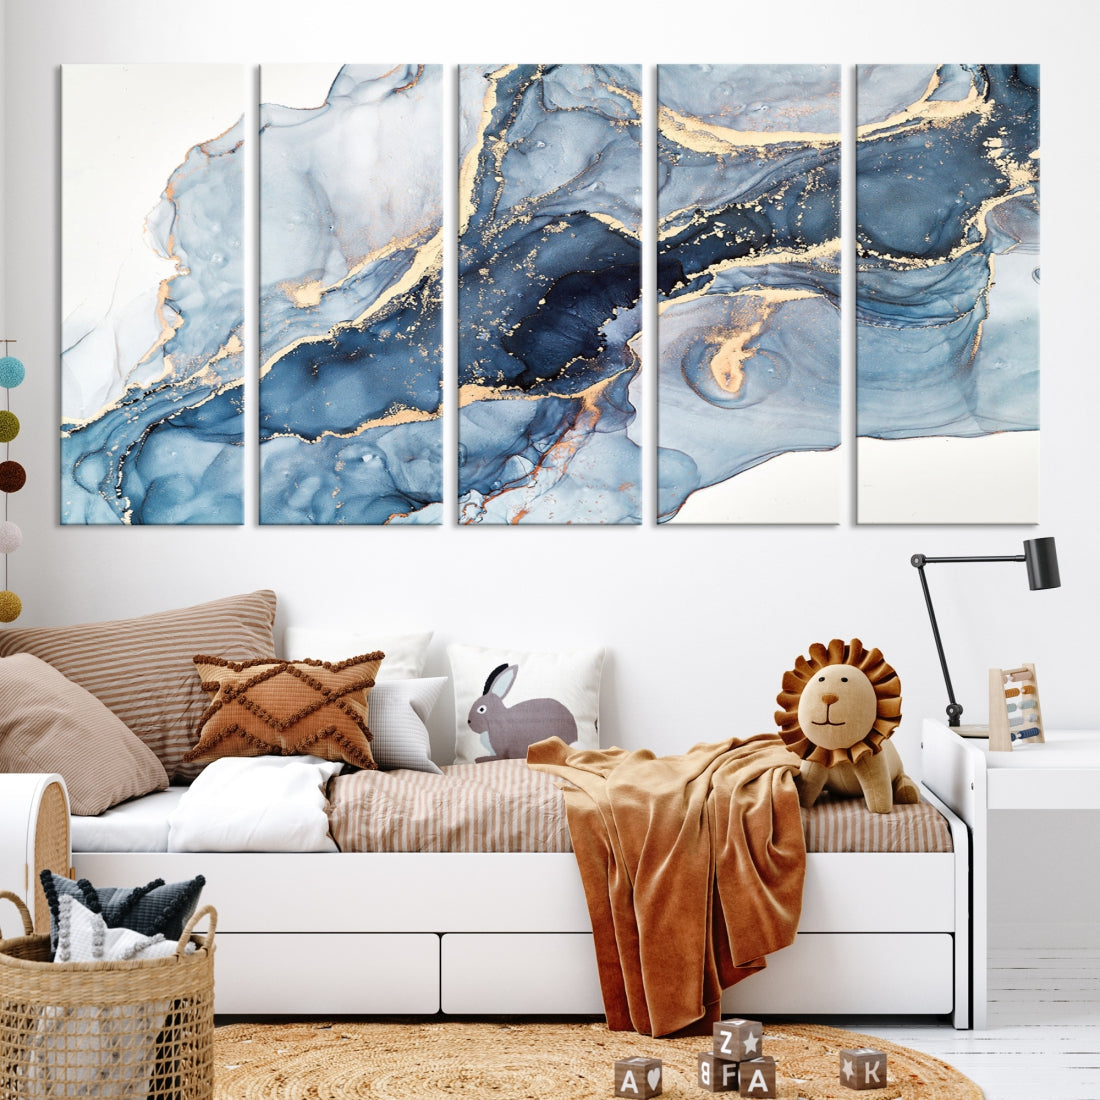 Large Blue Abstract Fluid Effect Marble Canvas Wall Art Print